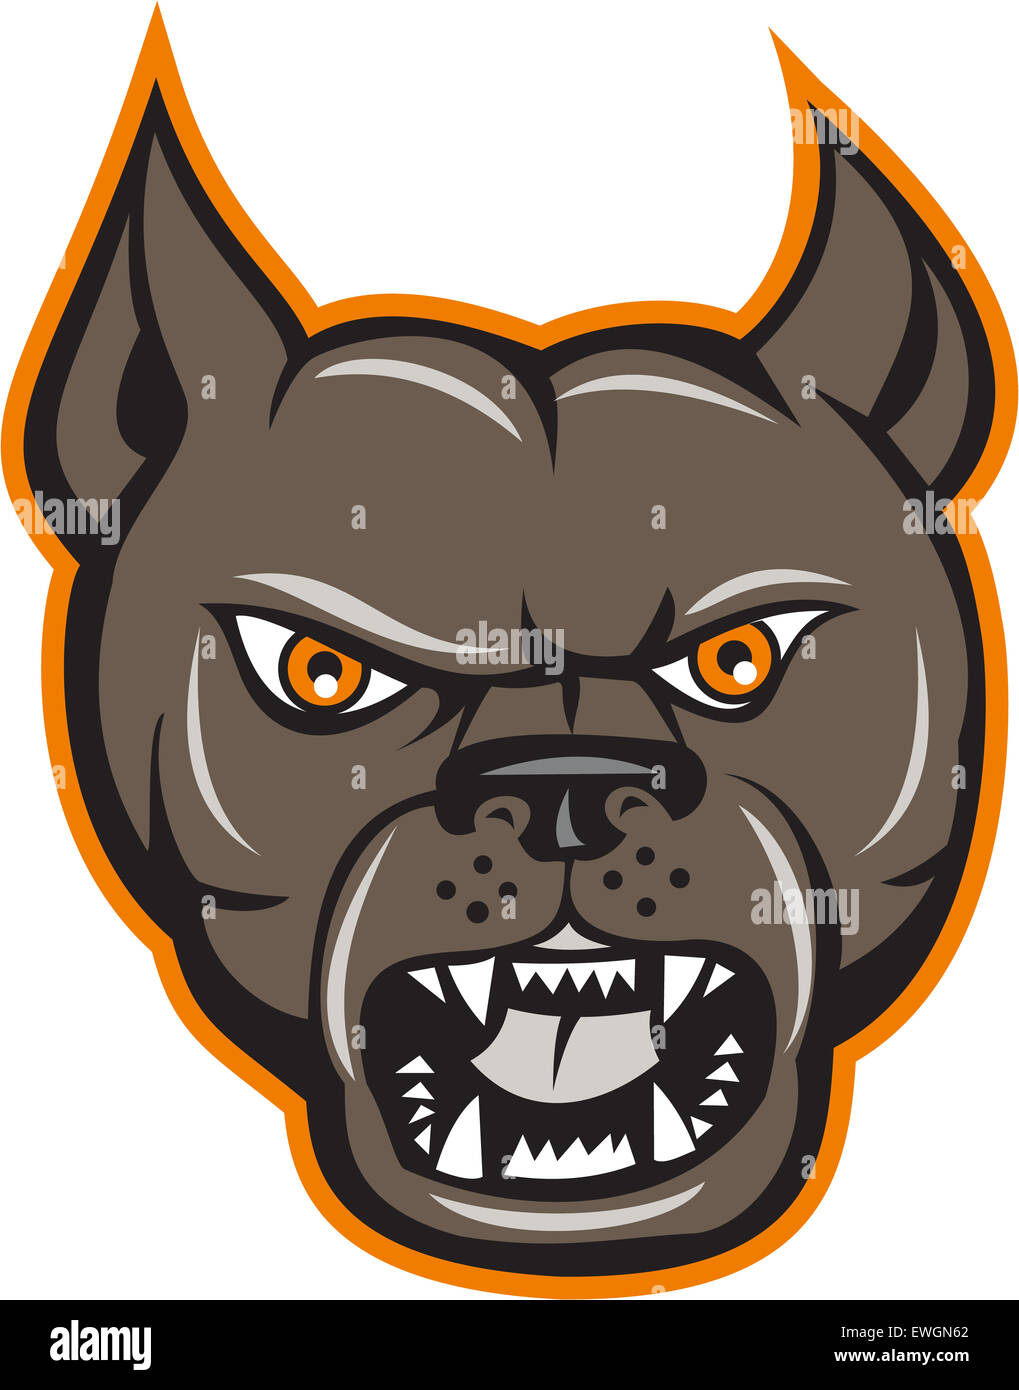 Illustration of an angry pitbull dog mongrel head facing front set on  isolated white background done in cartoon style Stock Photo - Alamy